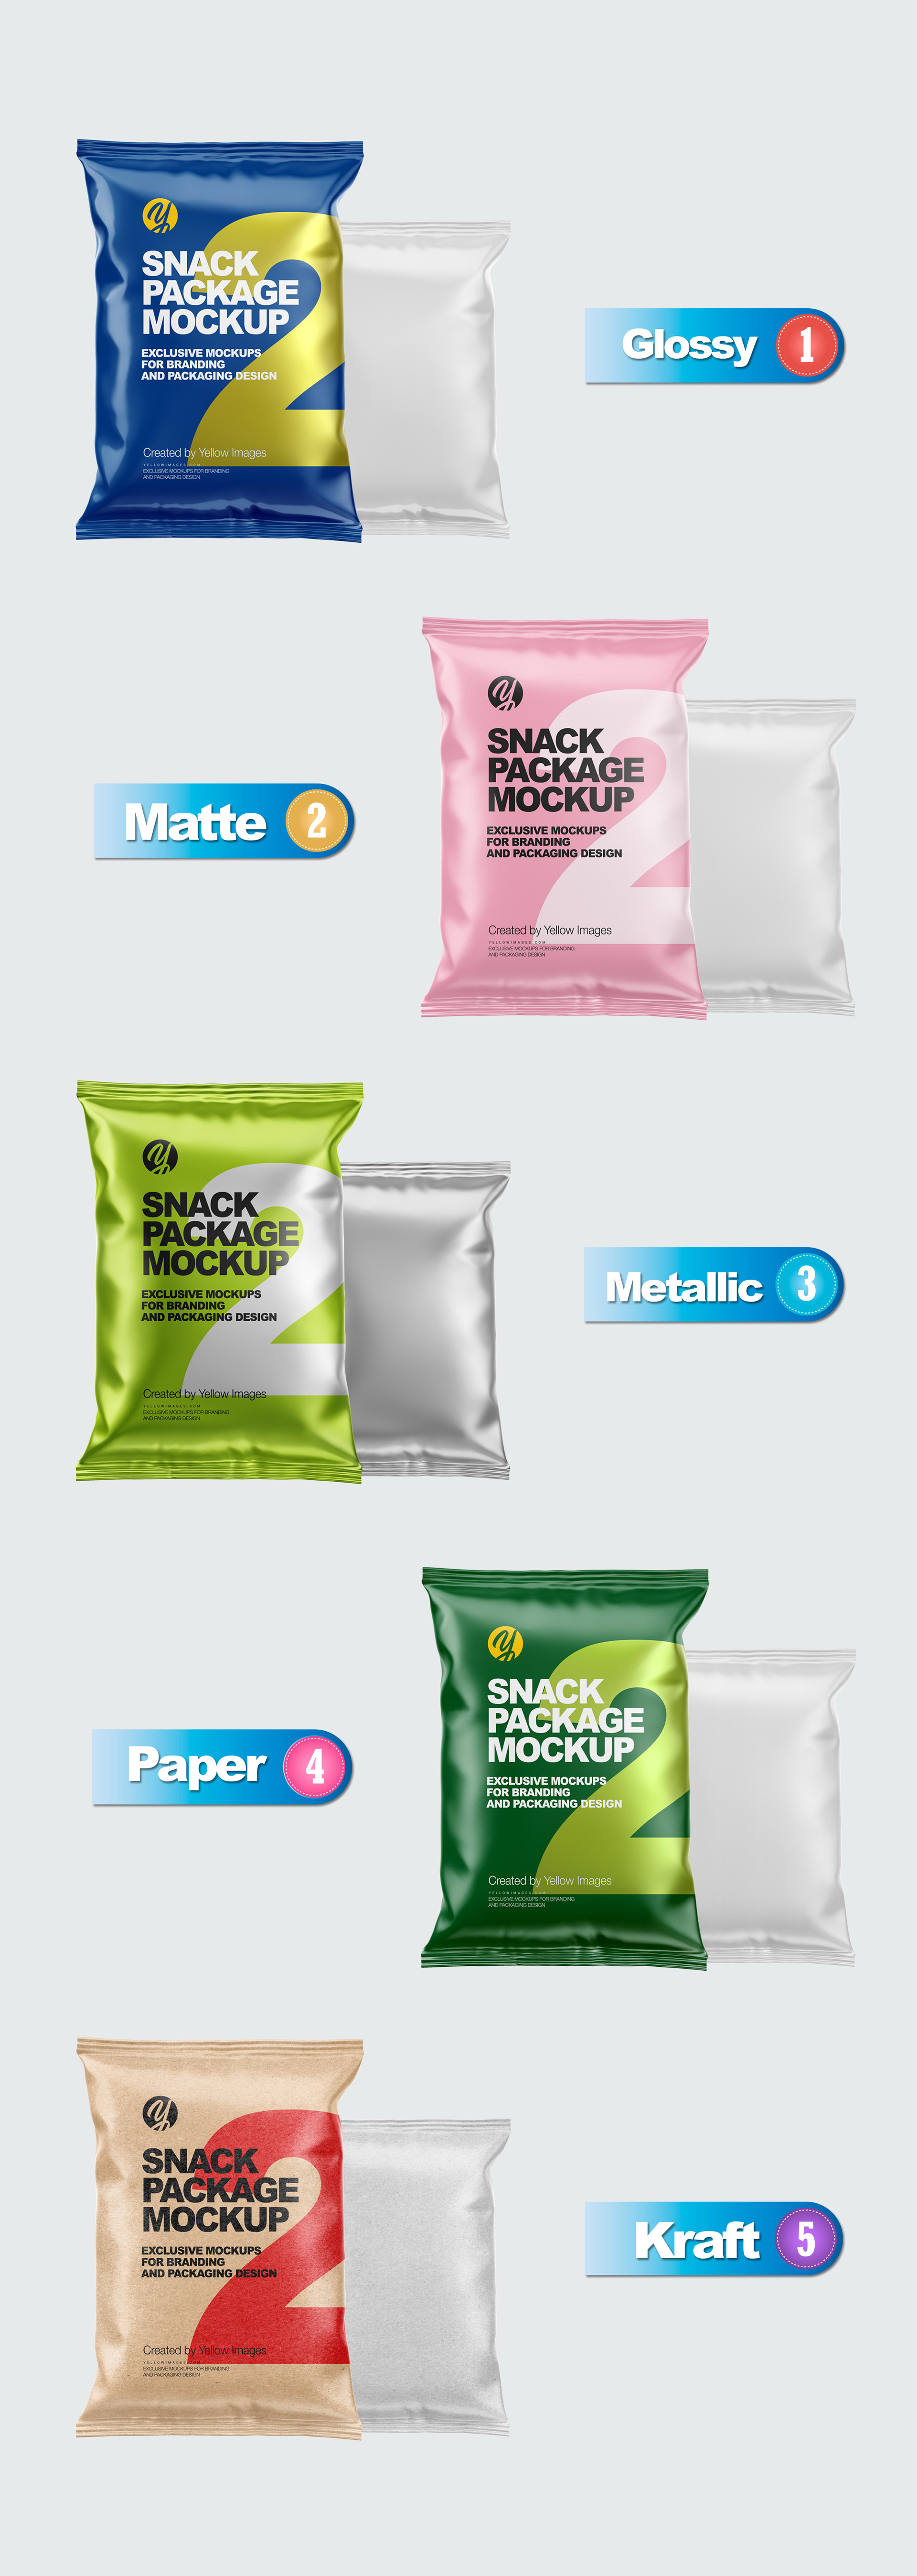 Snack Package Mockups13b8fc91432357.5e31a0c61ced0.jpg